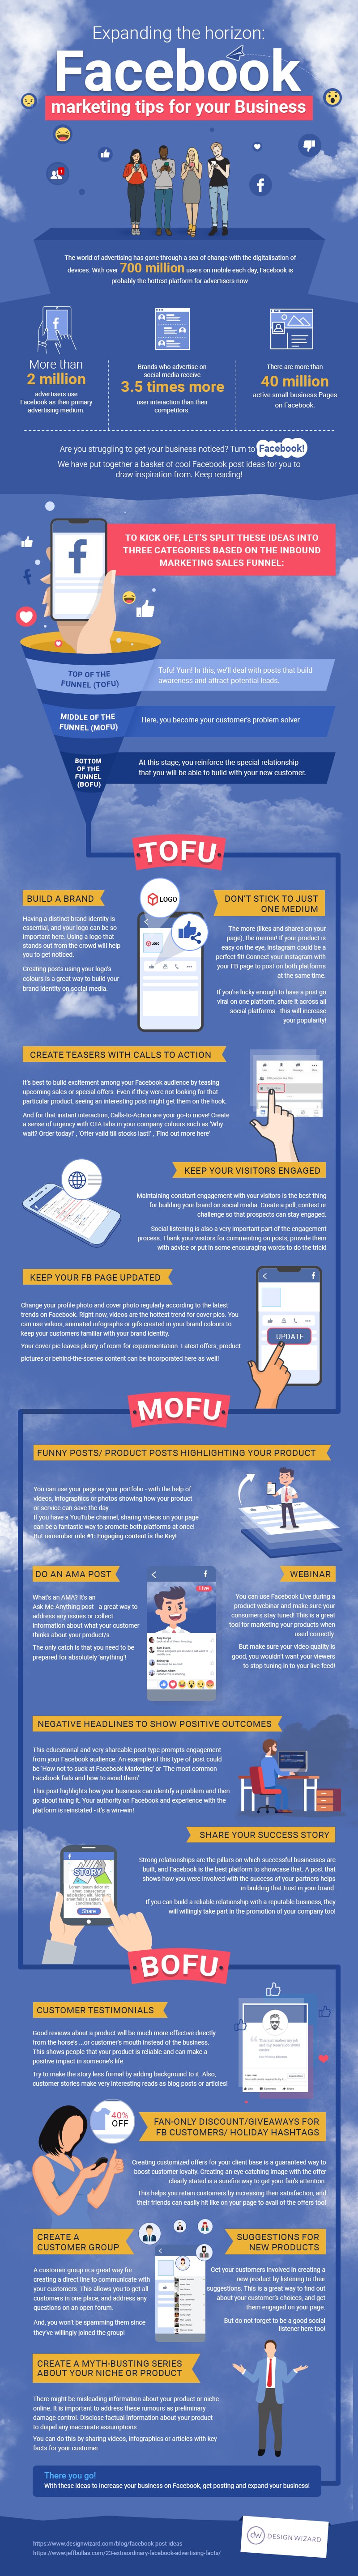 Facebook for Business_infographic Micheal edit (1)